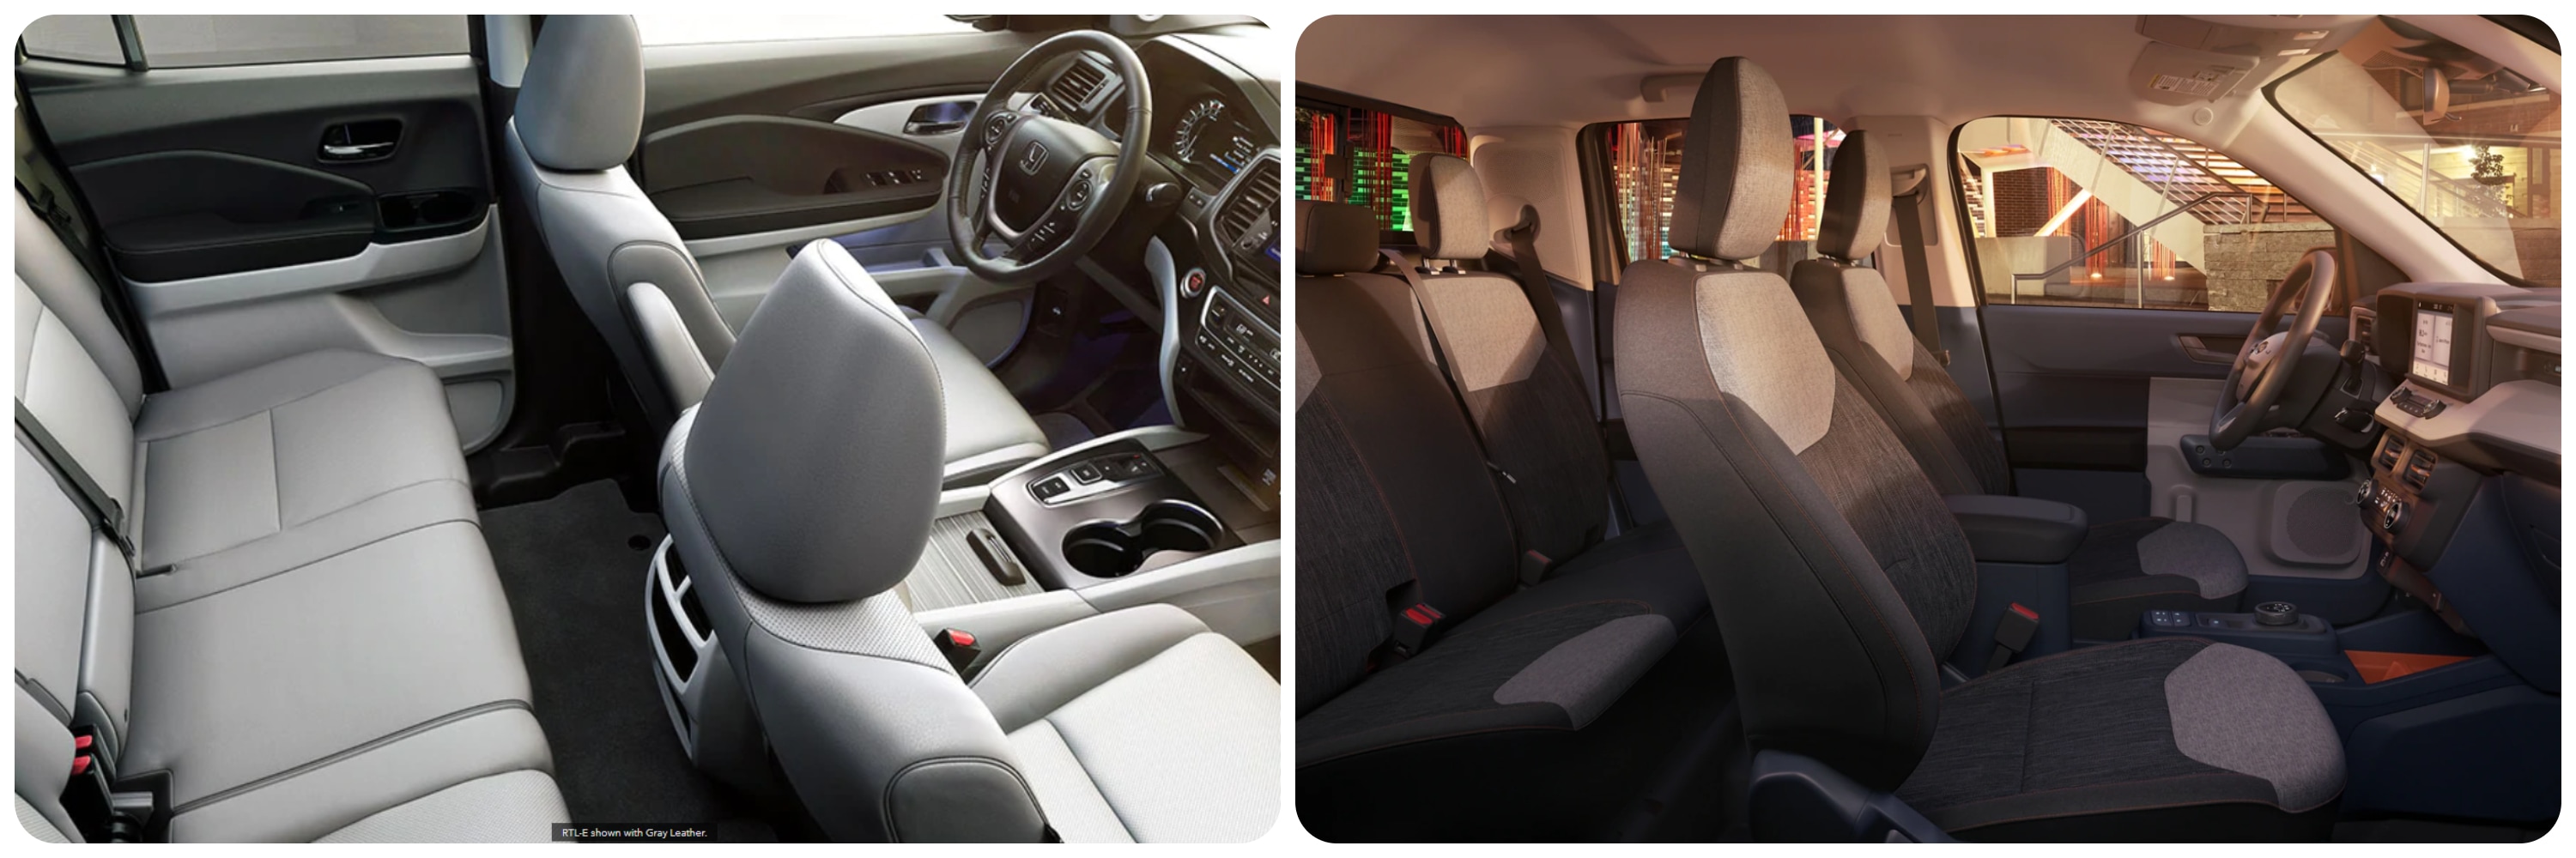 On the left an all gray interior view of the interior of a 2022 Honda Ridgeline and on the left a view of a two-toned gray interior of the 2022 Ford Maverick